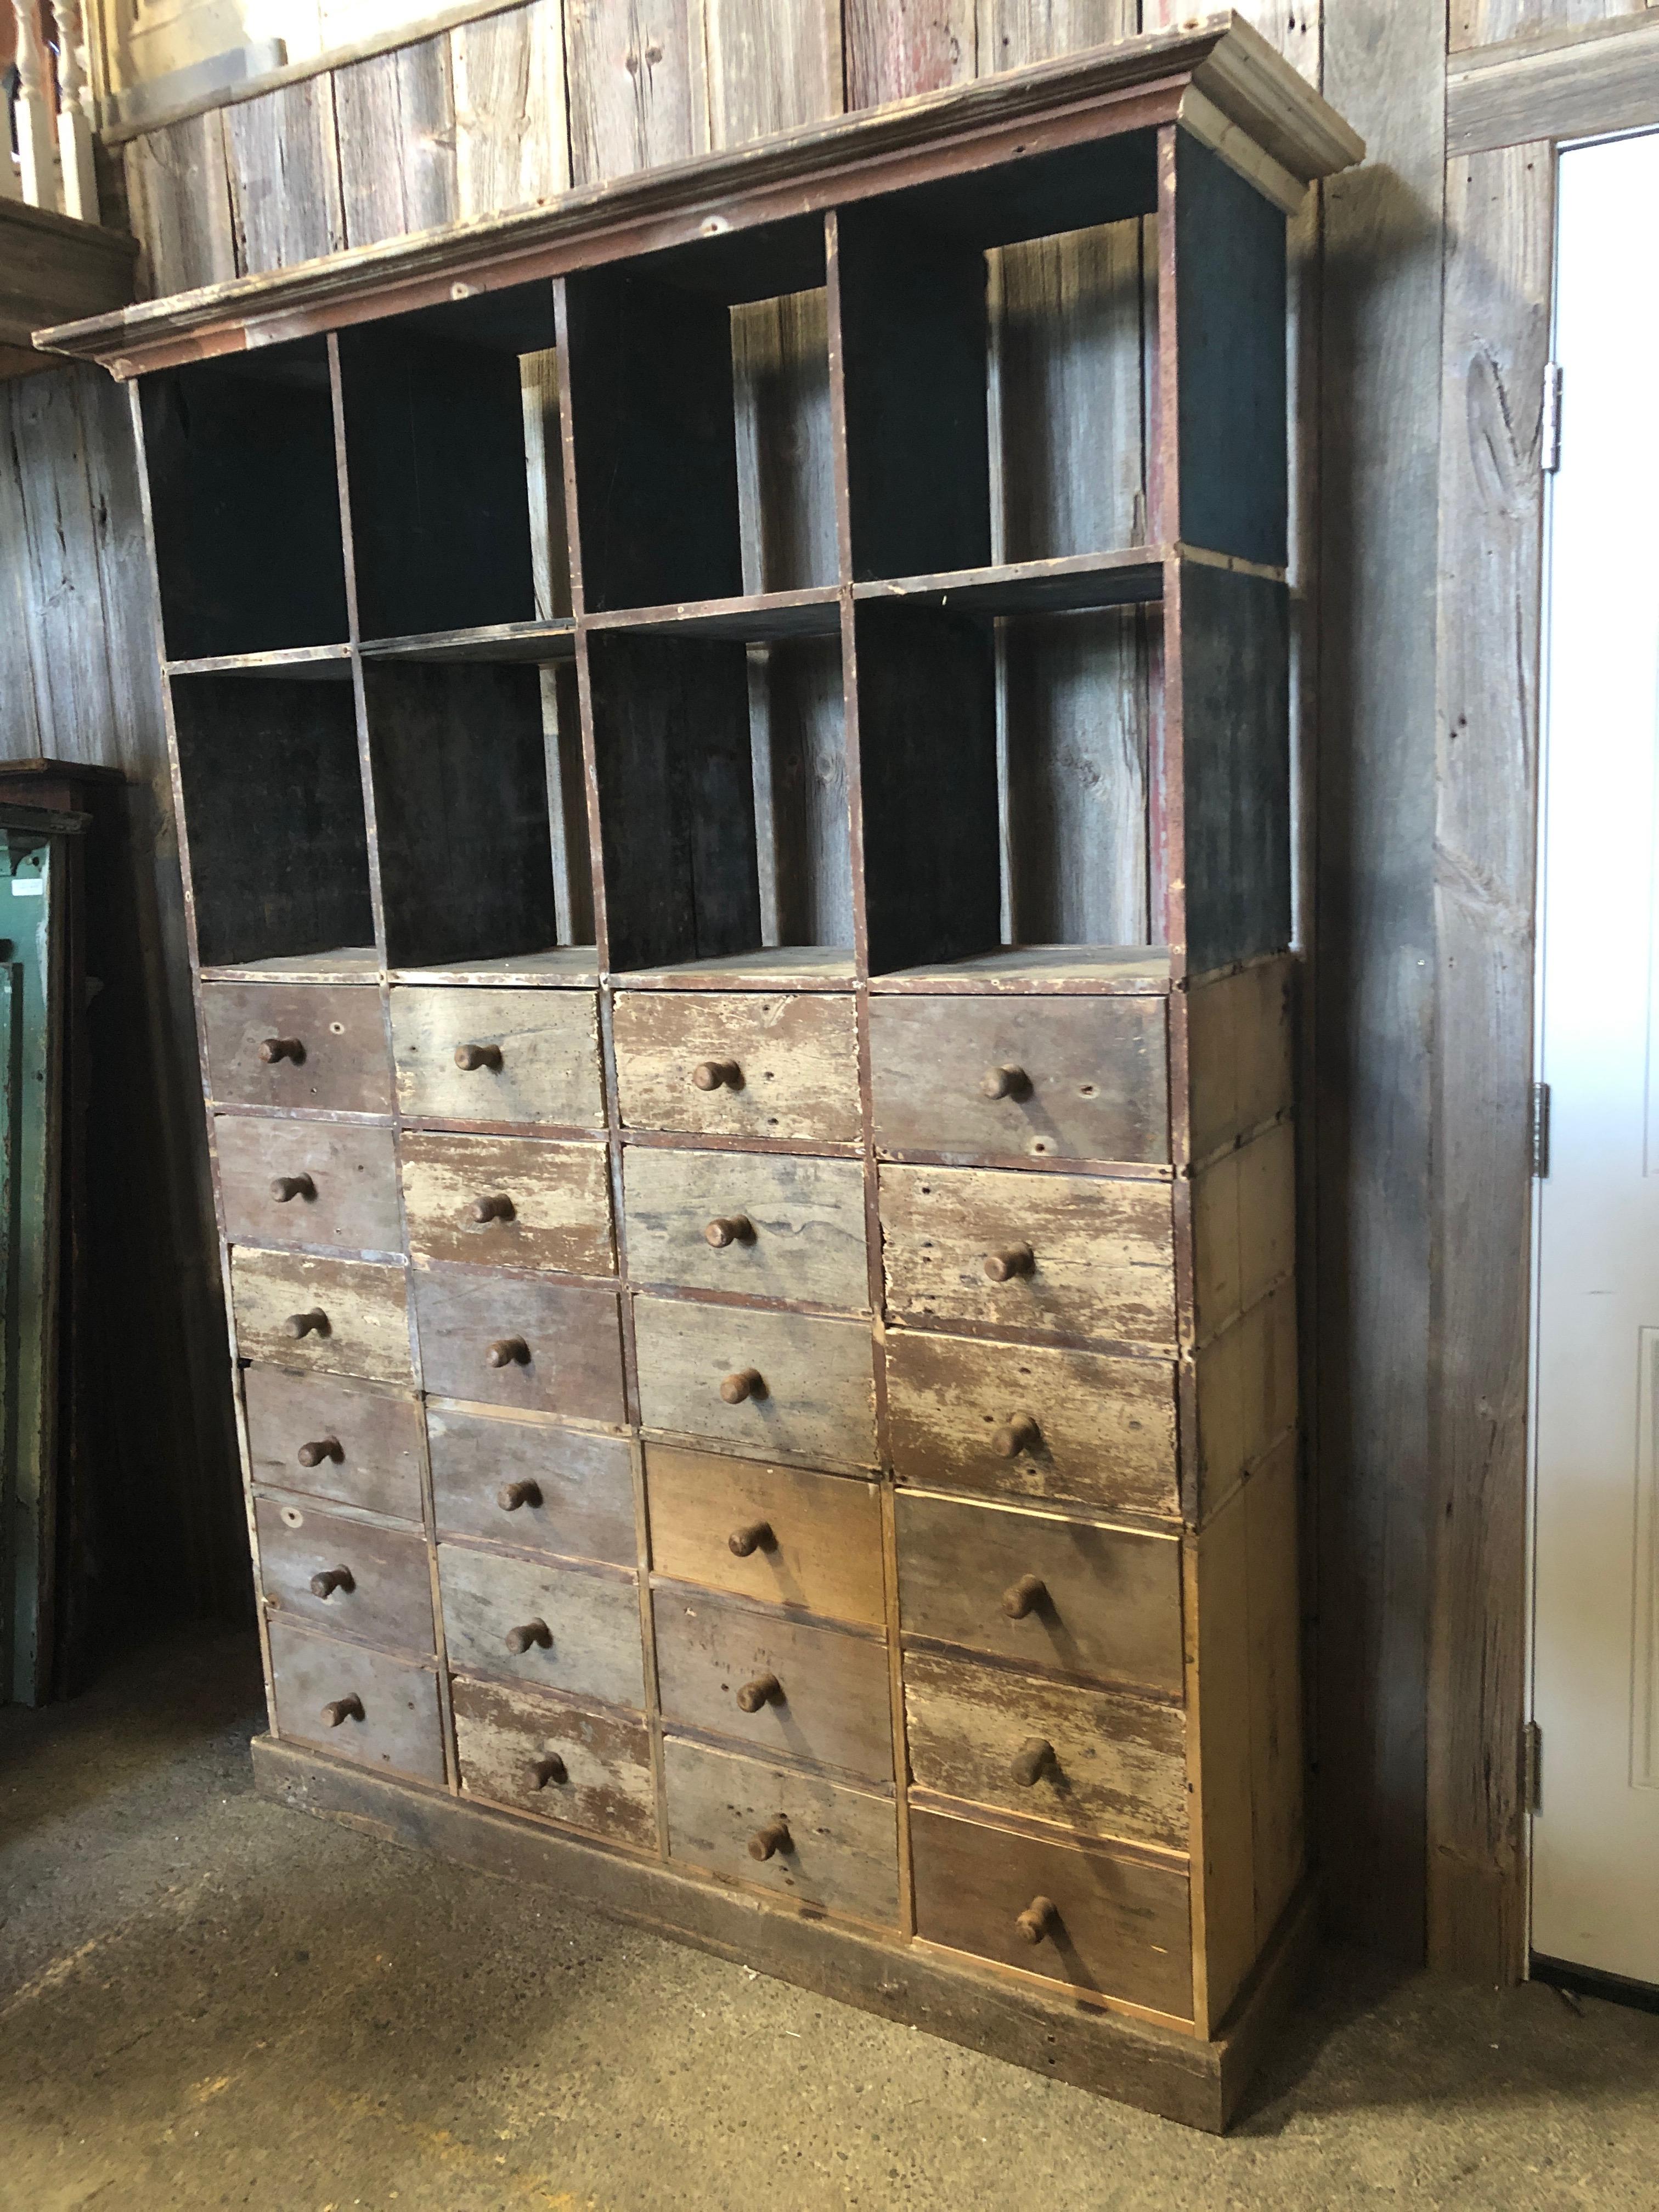 Found in Le Mans France, this is a one of a kind hand crafted multi drawer and cubbie cabinet having 24 individual drawers on bottom half and 8 open cubbies on the upper section. Cubbies are 14 D x 13 W.
The wood is old and reclaimed with a lively